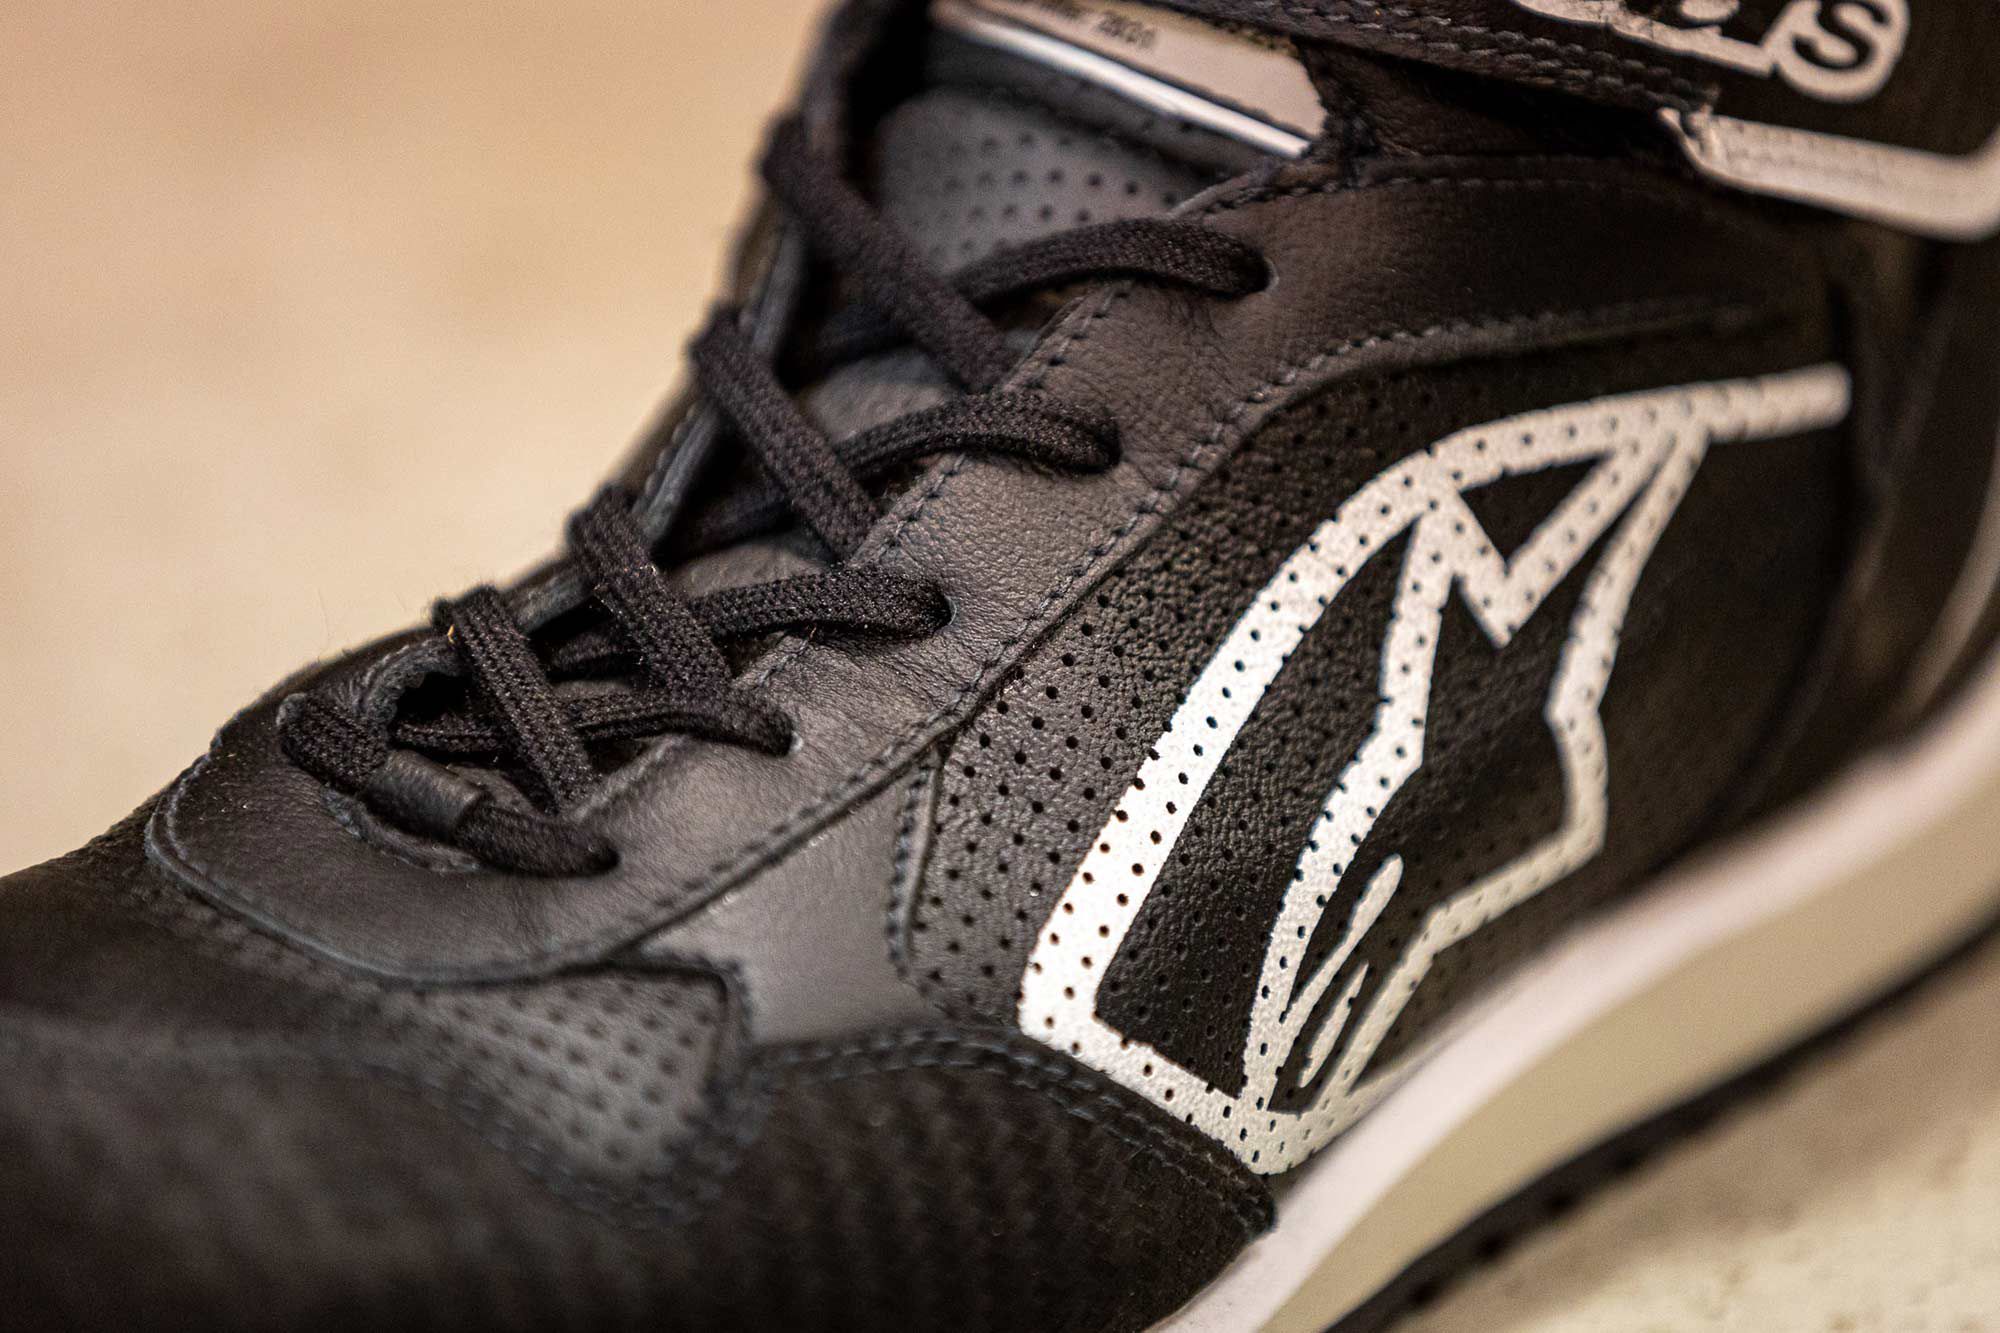 Quality stitching and understated graphics result in a no-frills trail riding shoe.